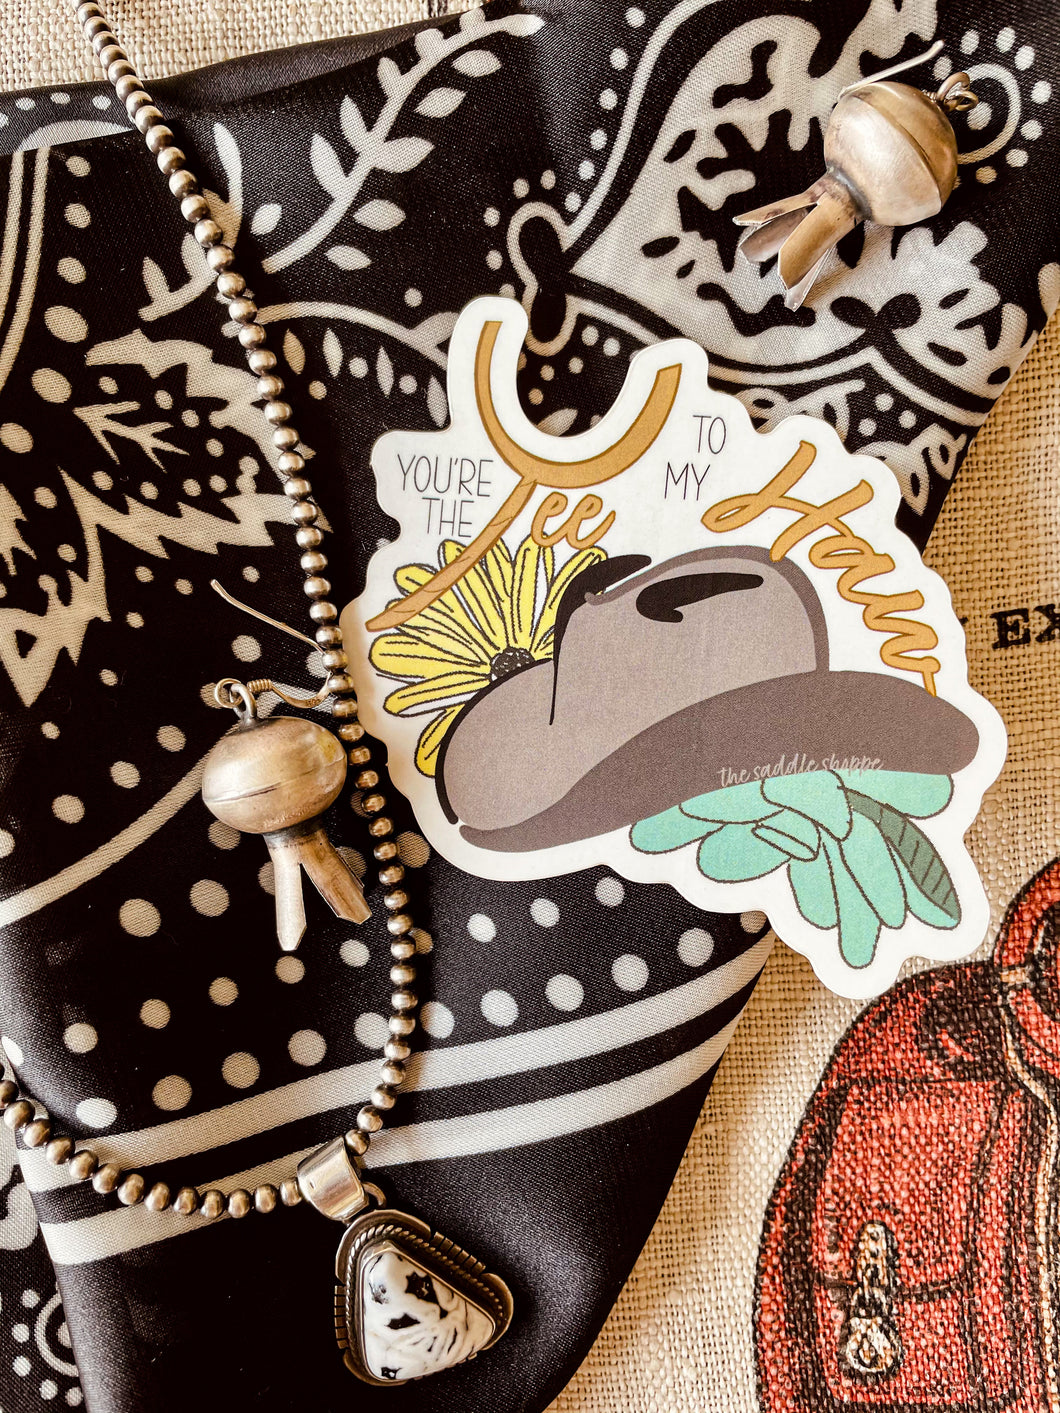 You're the Yee to my Haw Stickers